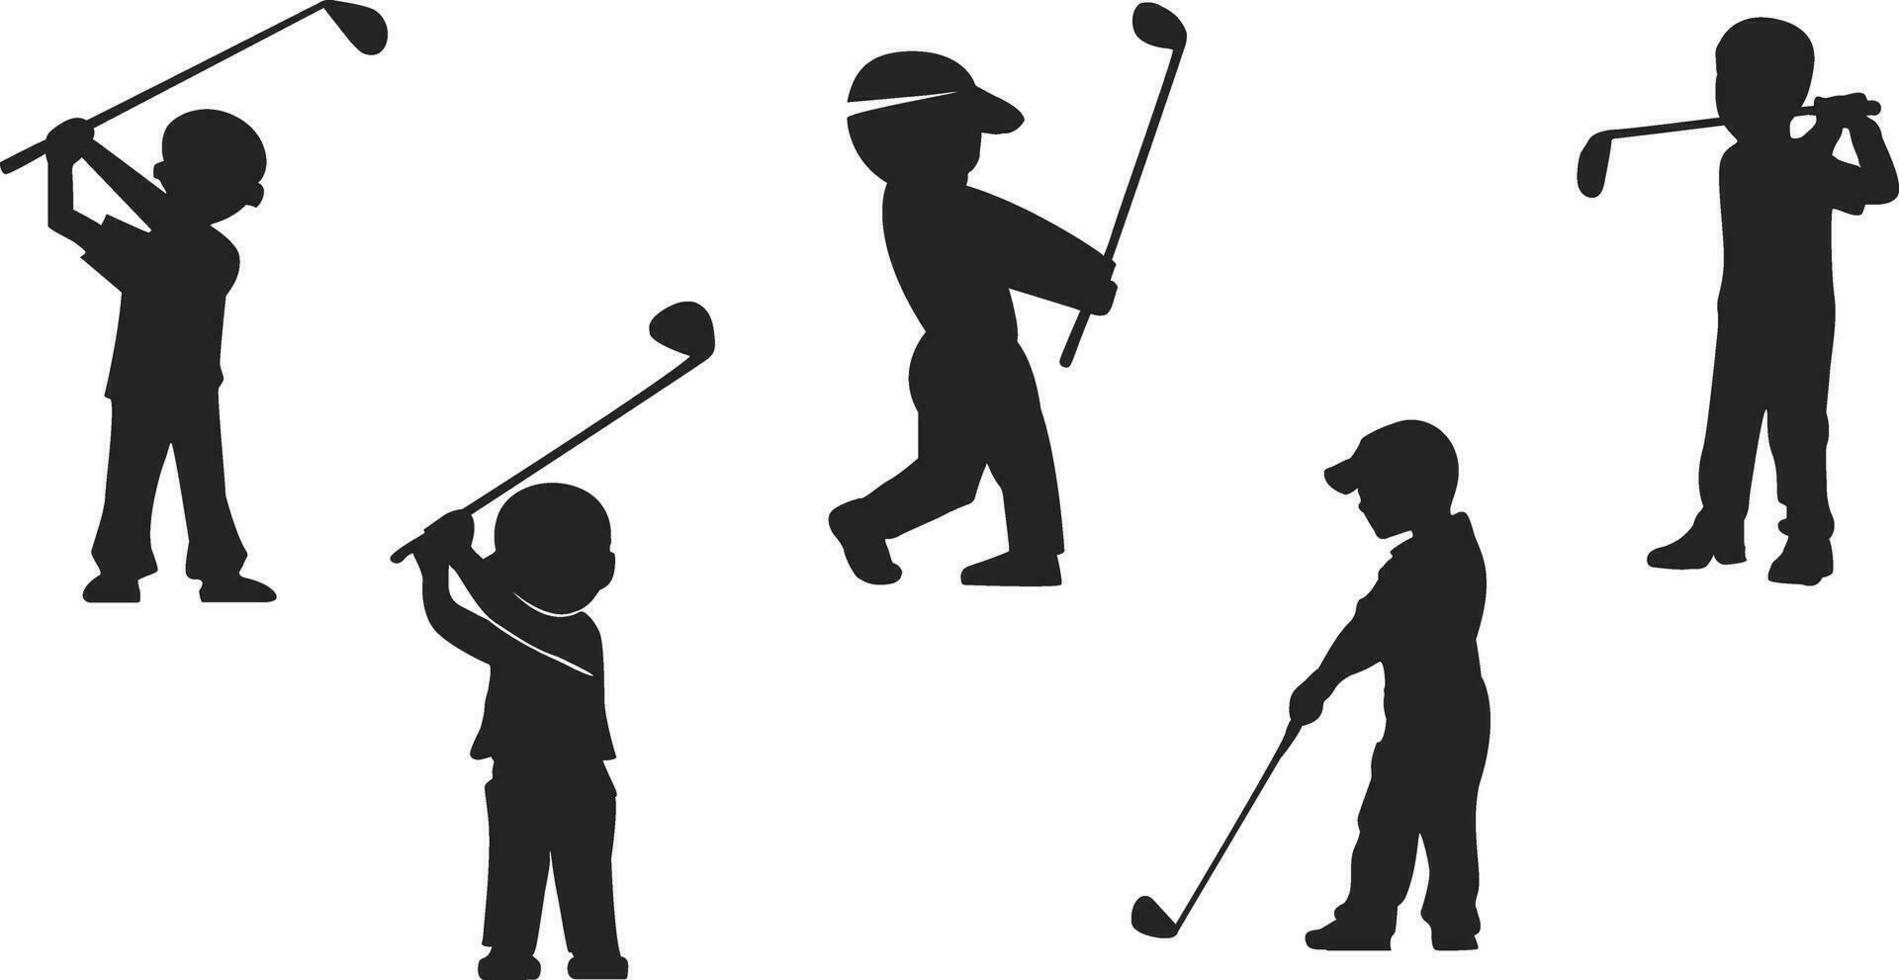 A kid playing golf silhouettes. Golf player silhouettes. Golfer silhouettes. Vector illustration